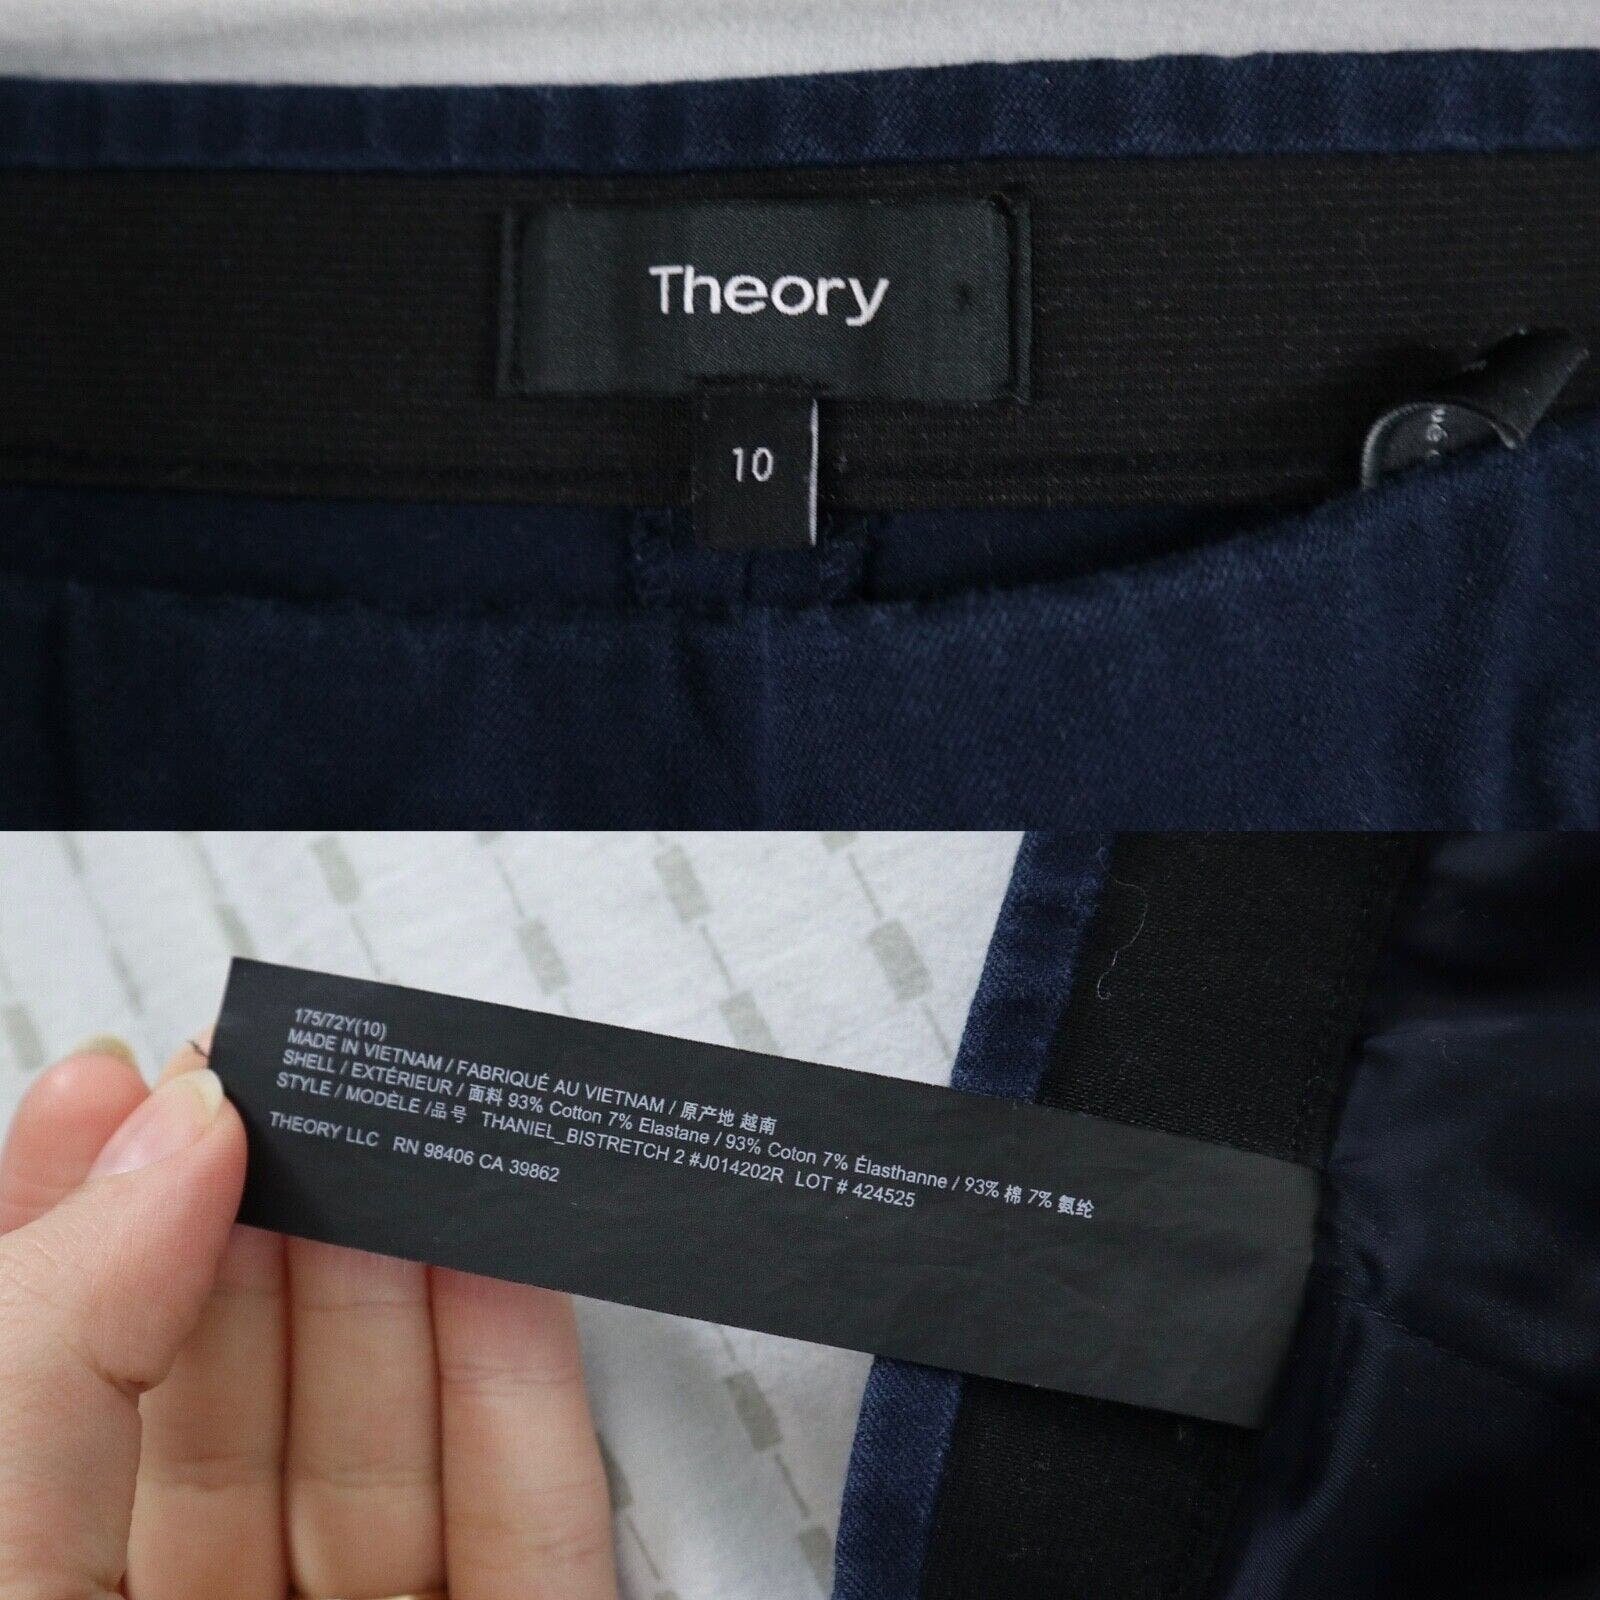 Affordable Theory Size 10 Thaniel Cotton Bistretch Pant Slim Ankle Pull On Pants Blue ocKaCbKU5 Counter Genuine 